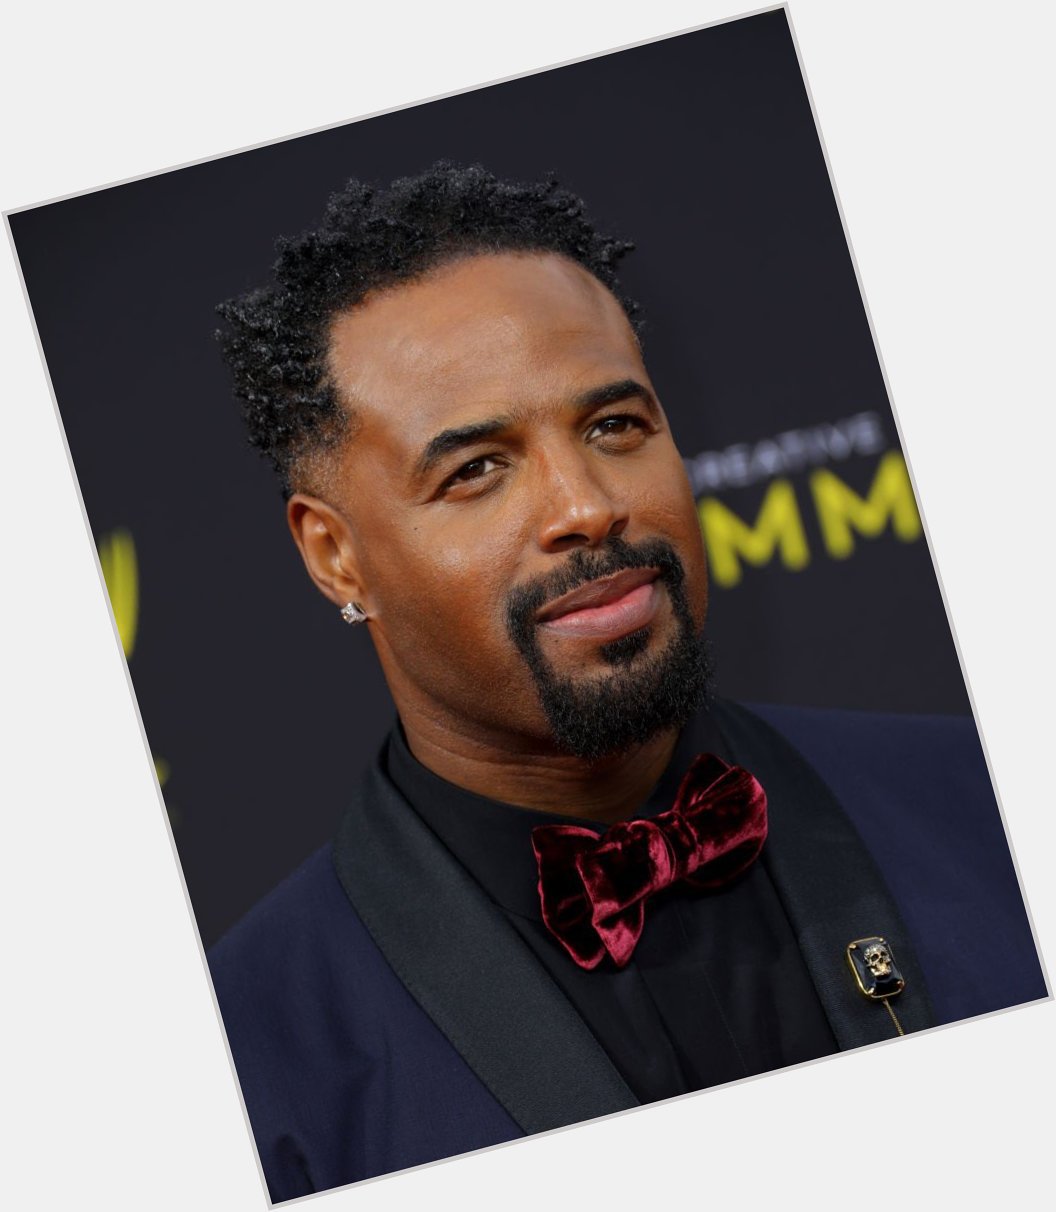 Wishing Shawn Wayans a Happy 50th Birthday  . What s your favorite Wayans brother movie/tv role? 